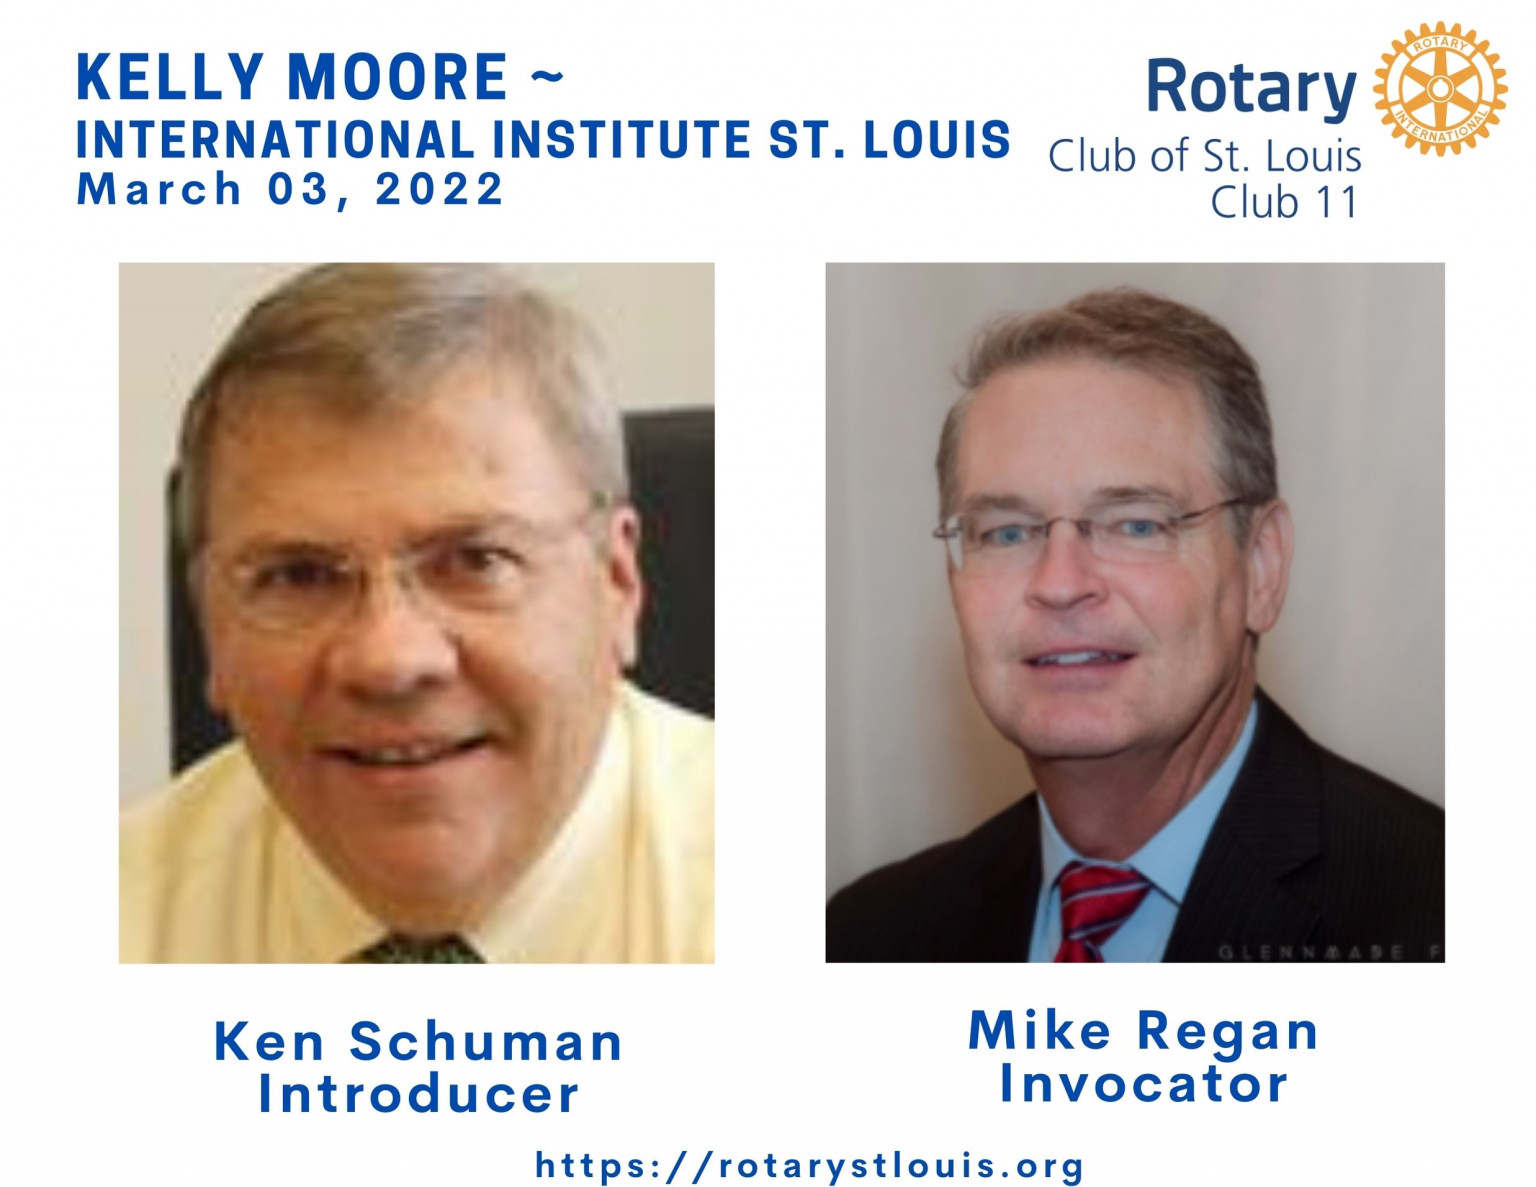 Ken Schuman, Introducer and Mike Regan, Invocator March 3, 2022 at St. Louis Rotary Club